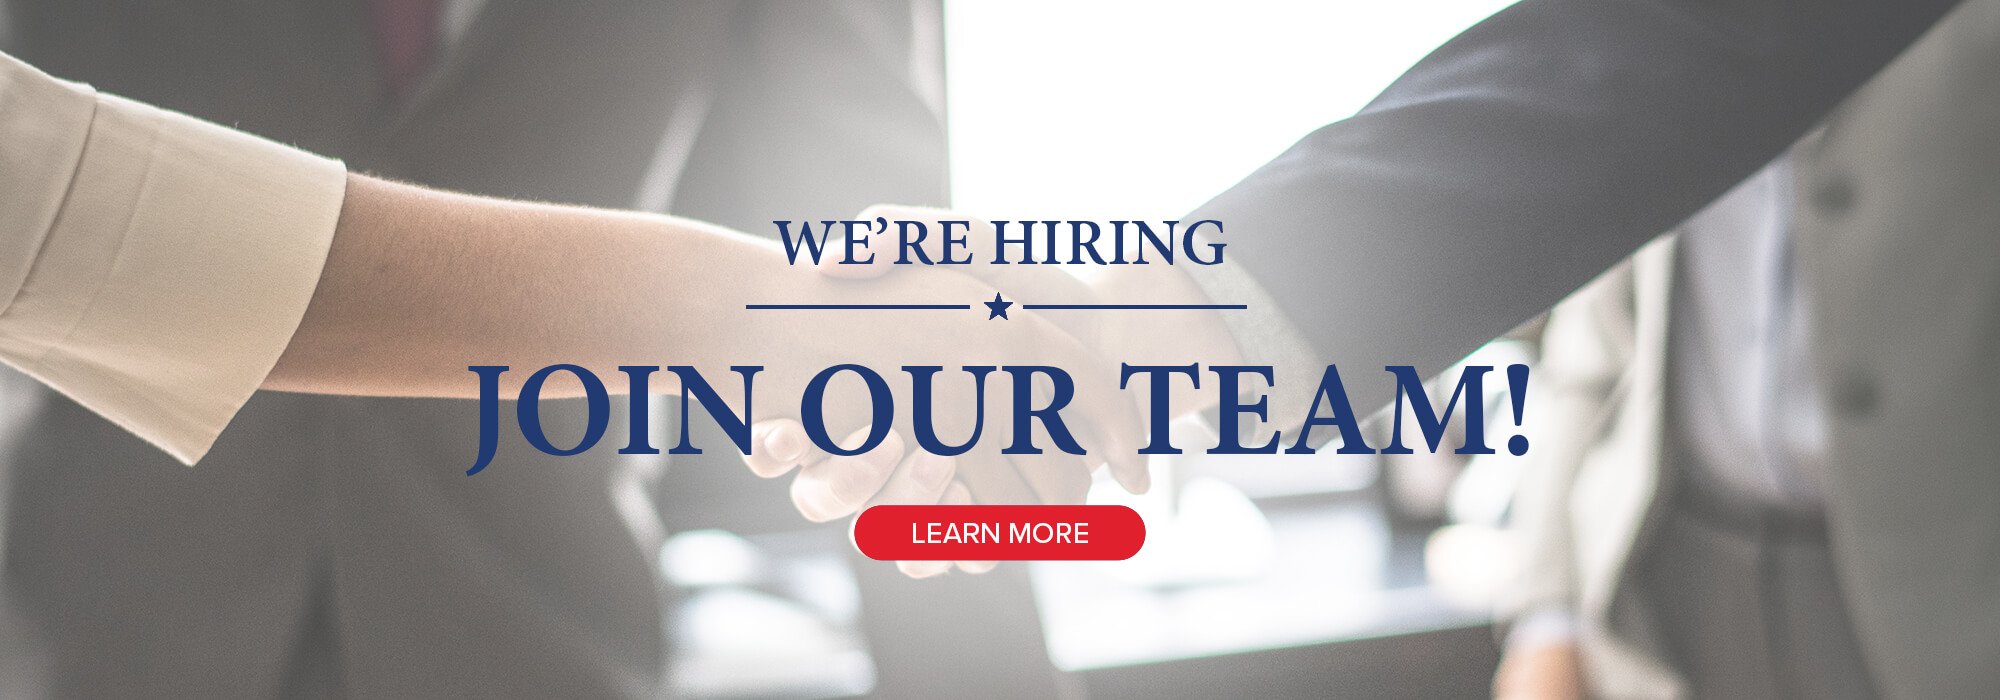 We're Hiring. Join our team! Learn more